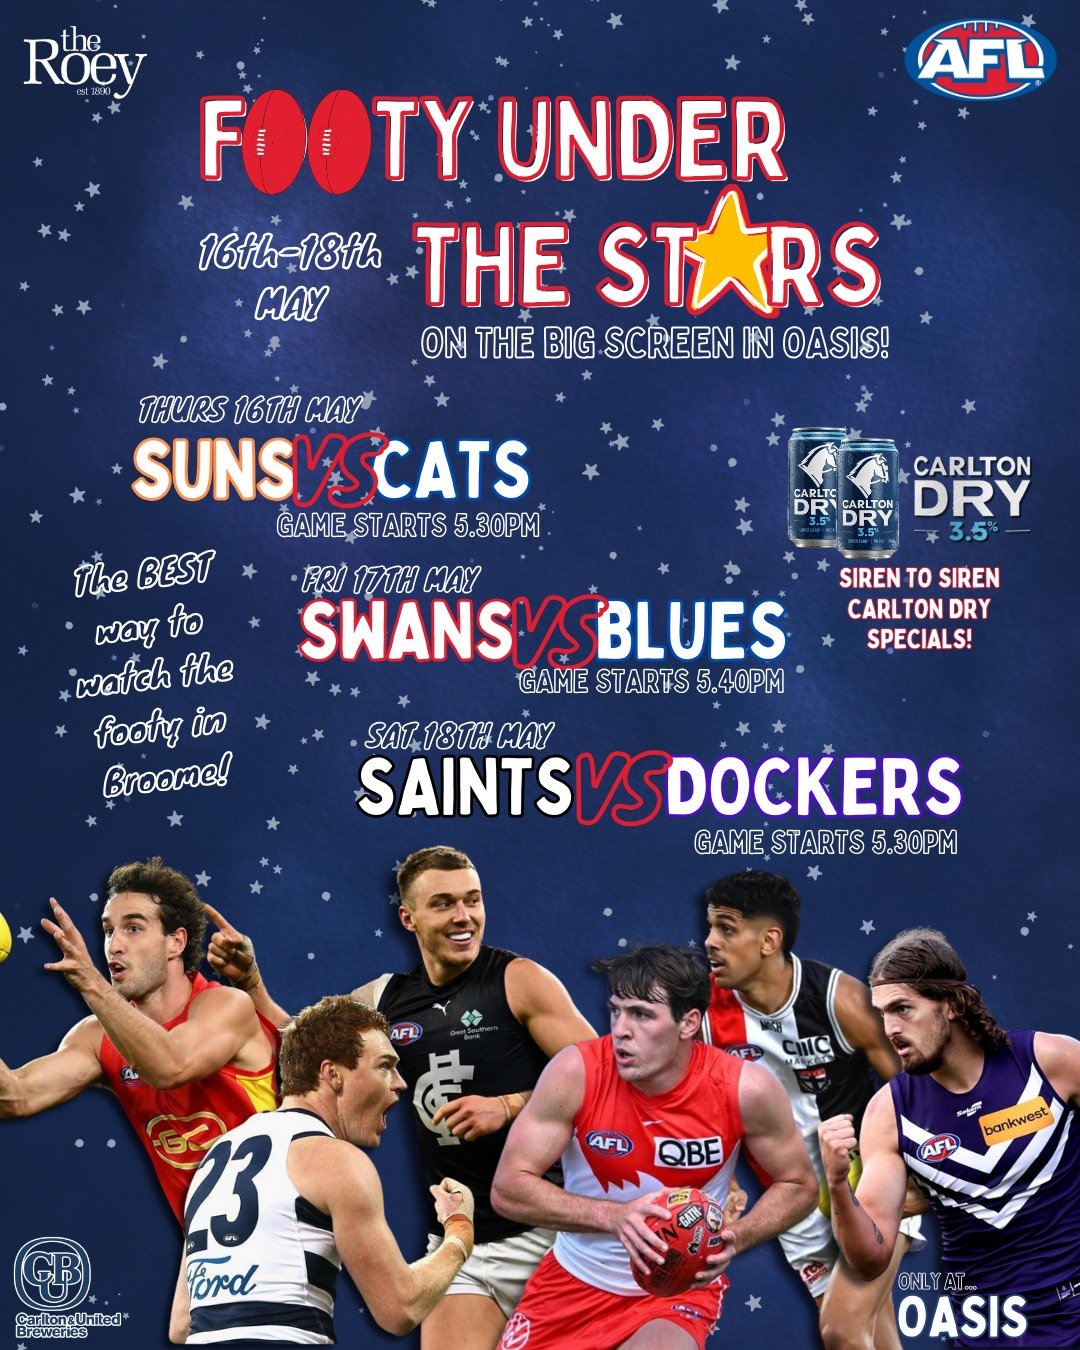 Your HUGE weekend of FOOTY starts TODAY! 🏉💥

Every game of the AFL &amp; NRL 2024 Seasons, LIVE &amp; LOUD 📣 on the big screens in the Sports Bar AND Oasis 🍺🌴

🌟 FOOTY UNDER THE STARS 🌟 on the biiiiig screen in Oasis this weekend:
Thurs 👉🏽 S